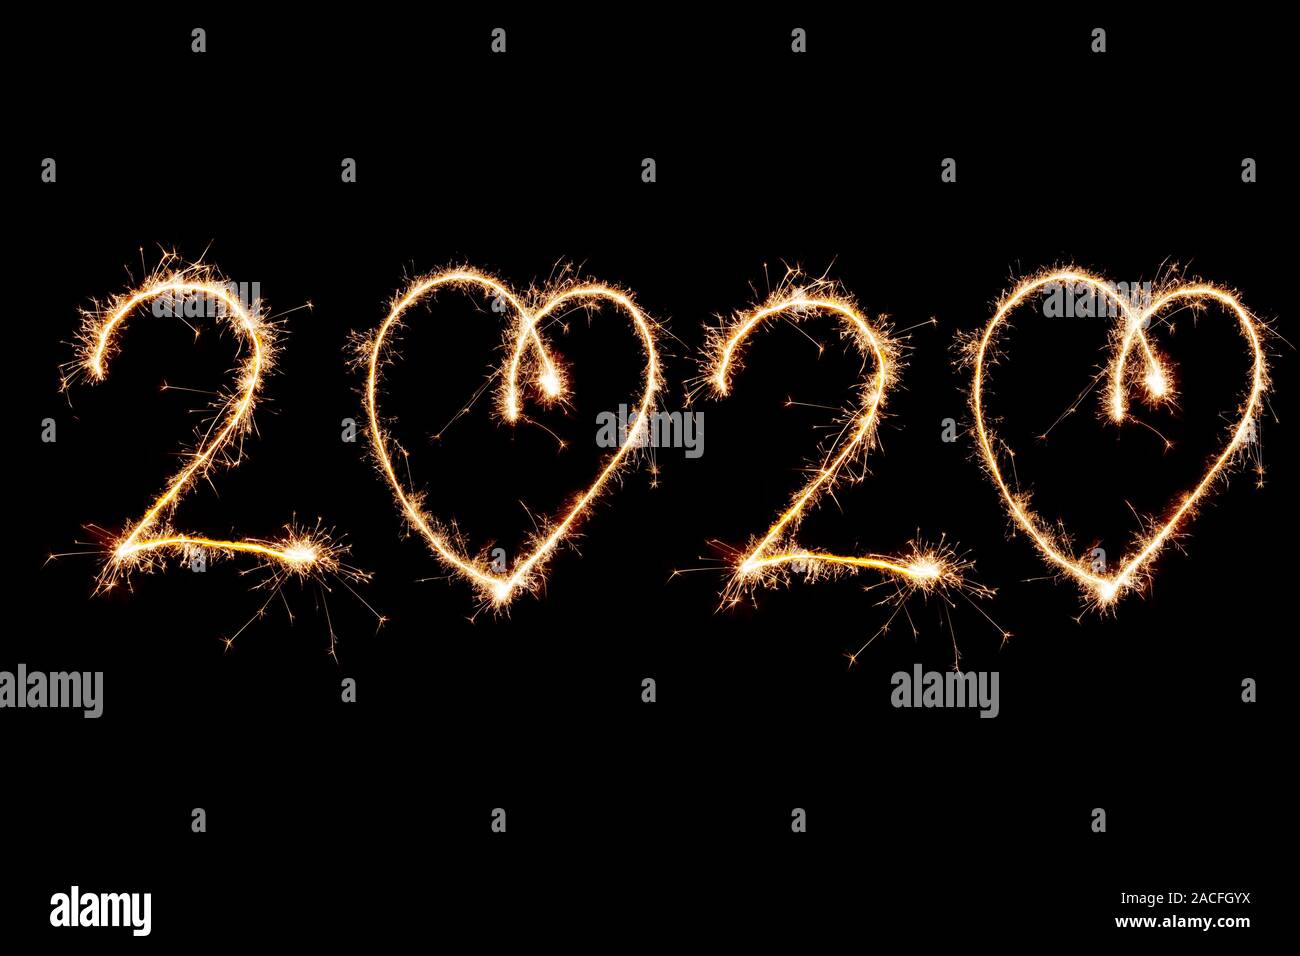 2020 written with Sparkle firework on black background, happy new year 2020 concept. Stock Photo